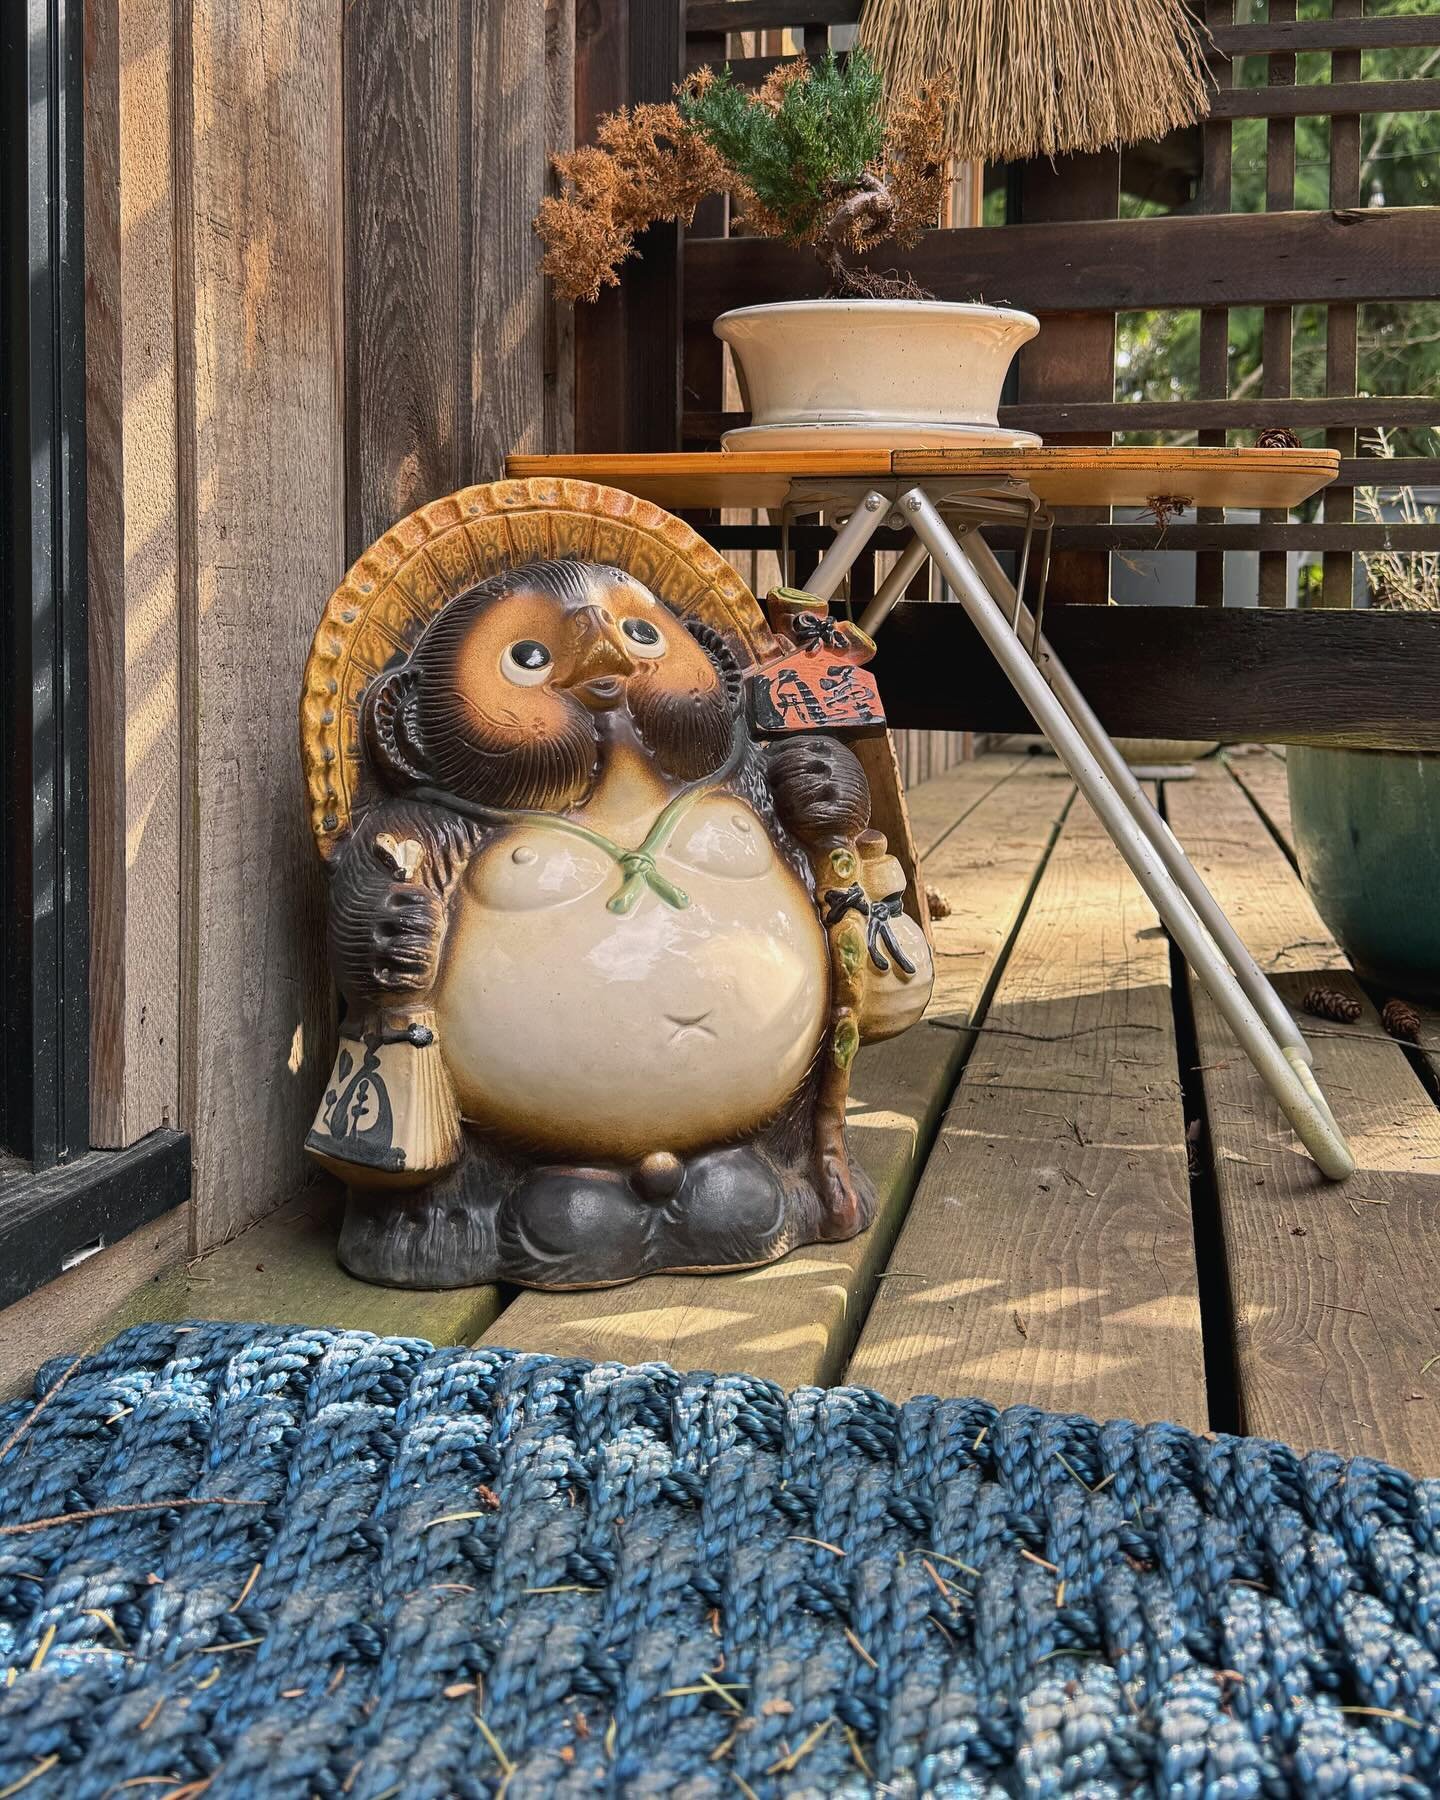 We were very happy to welcome these two tanuki to our home!🦝✌🏼

Meant to bring good fortune, you&rsquo;ll see tanuki figures in front of restaurants &amp; businesses across Japan. In our case, given the spate of natural calamities we&rsquo;ve exper